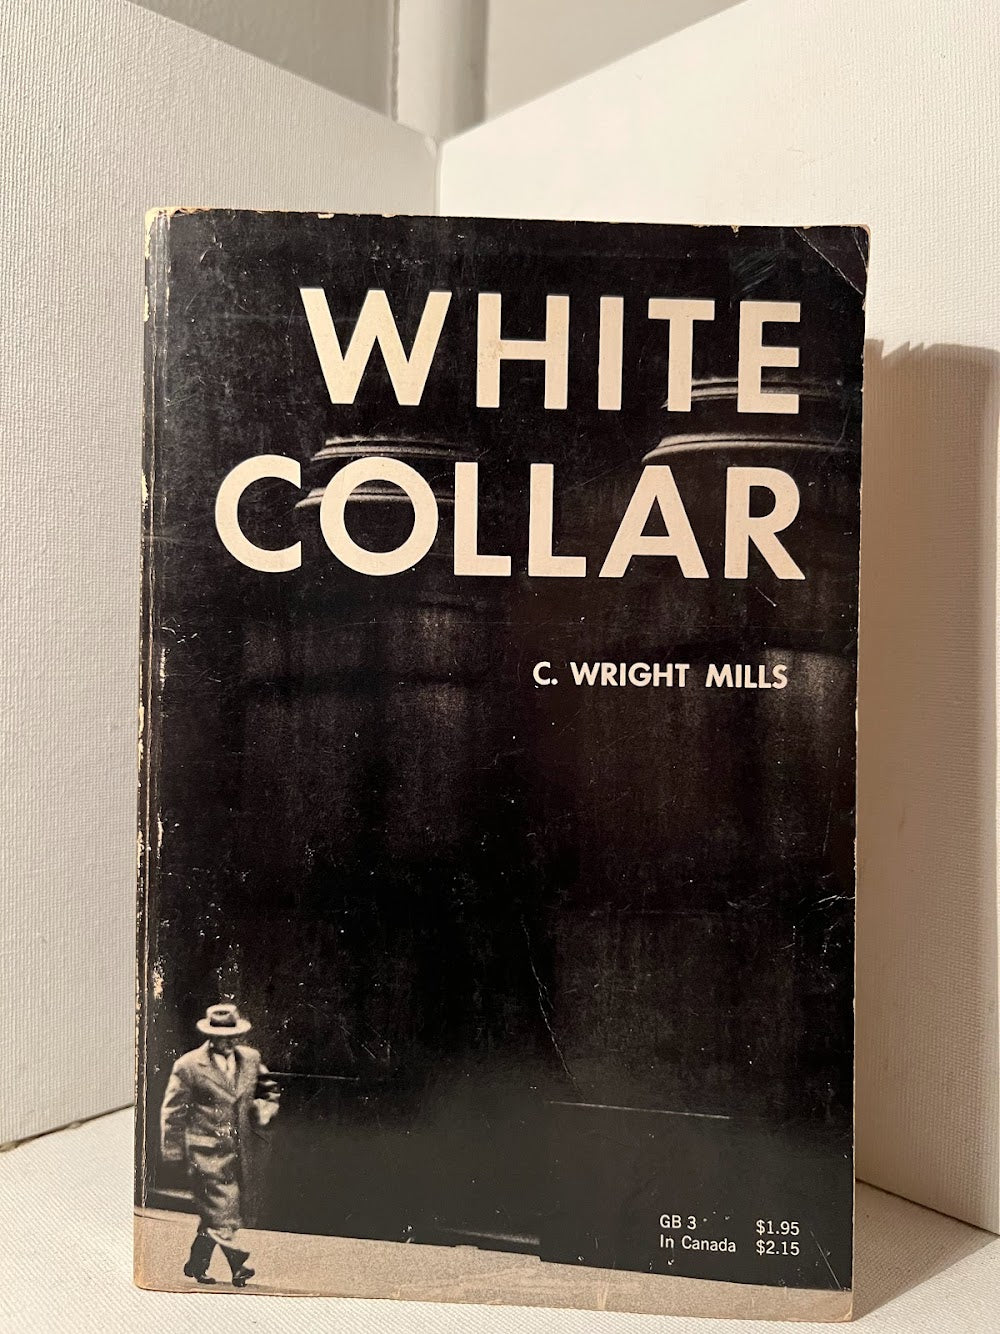 White Collar by C. Wright Mills